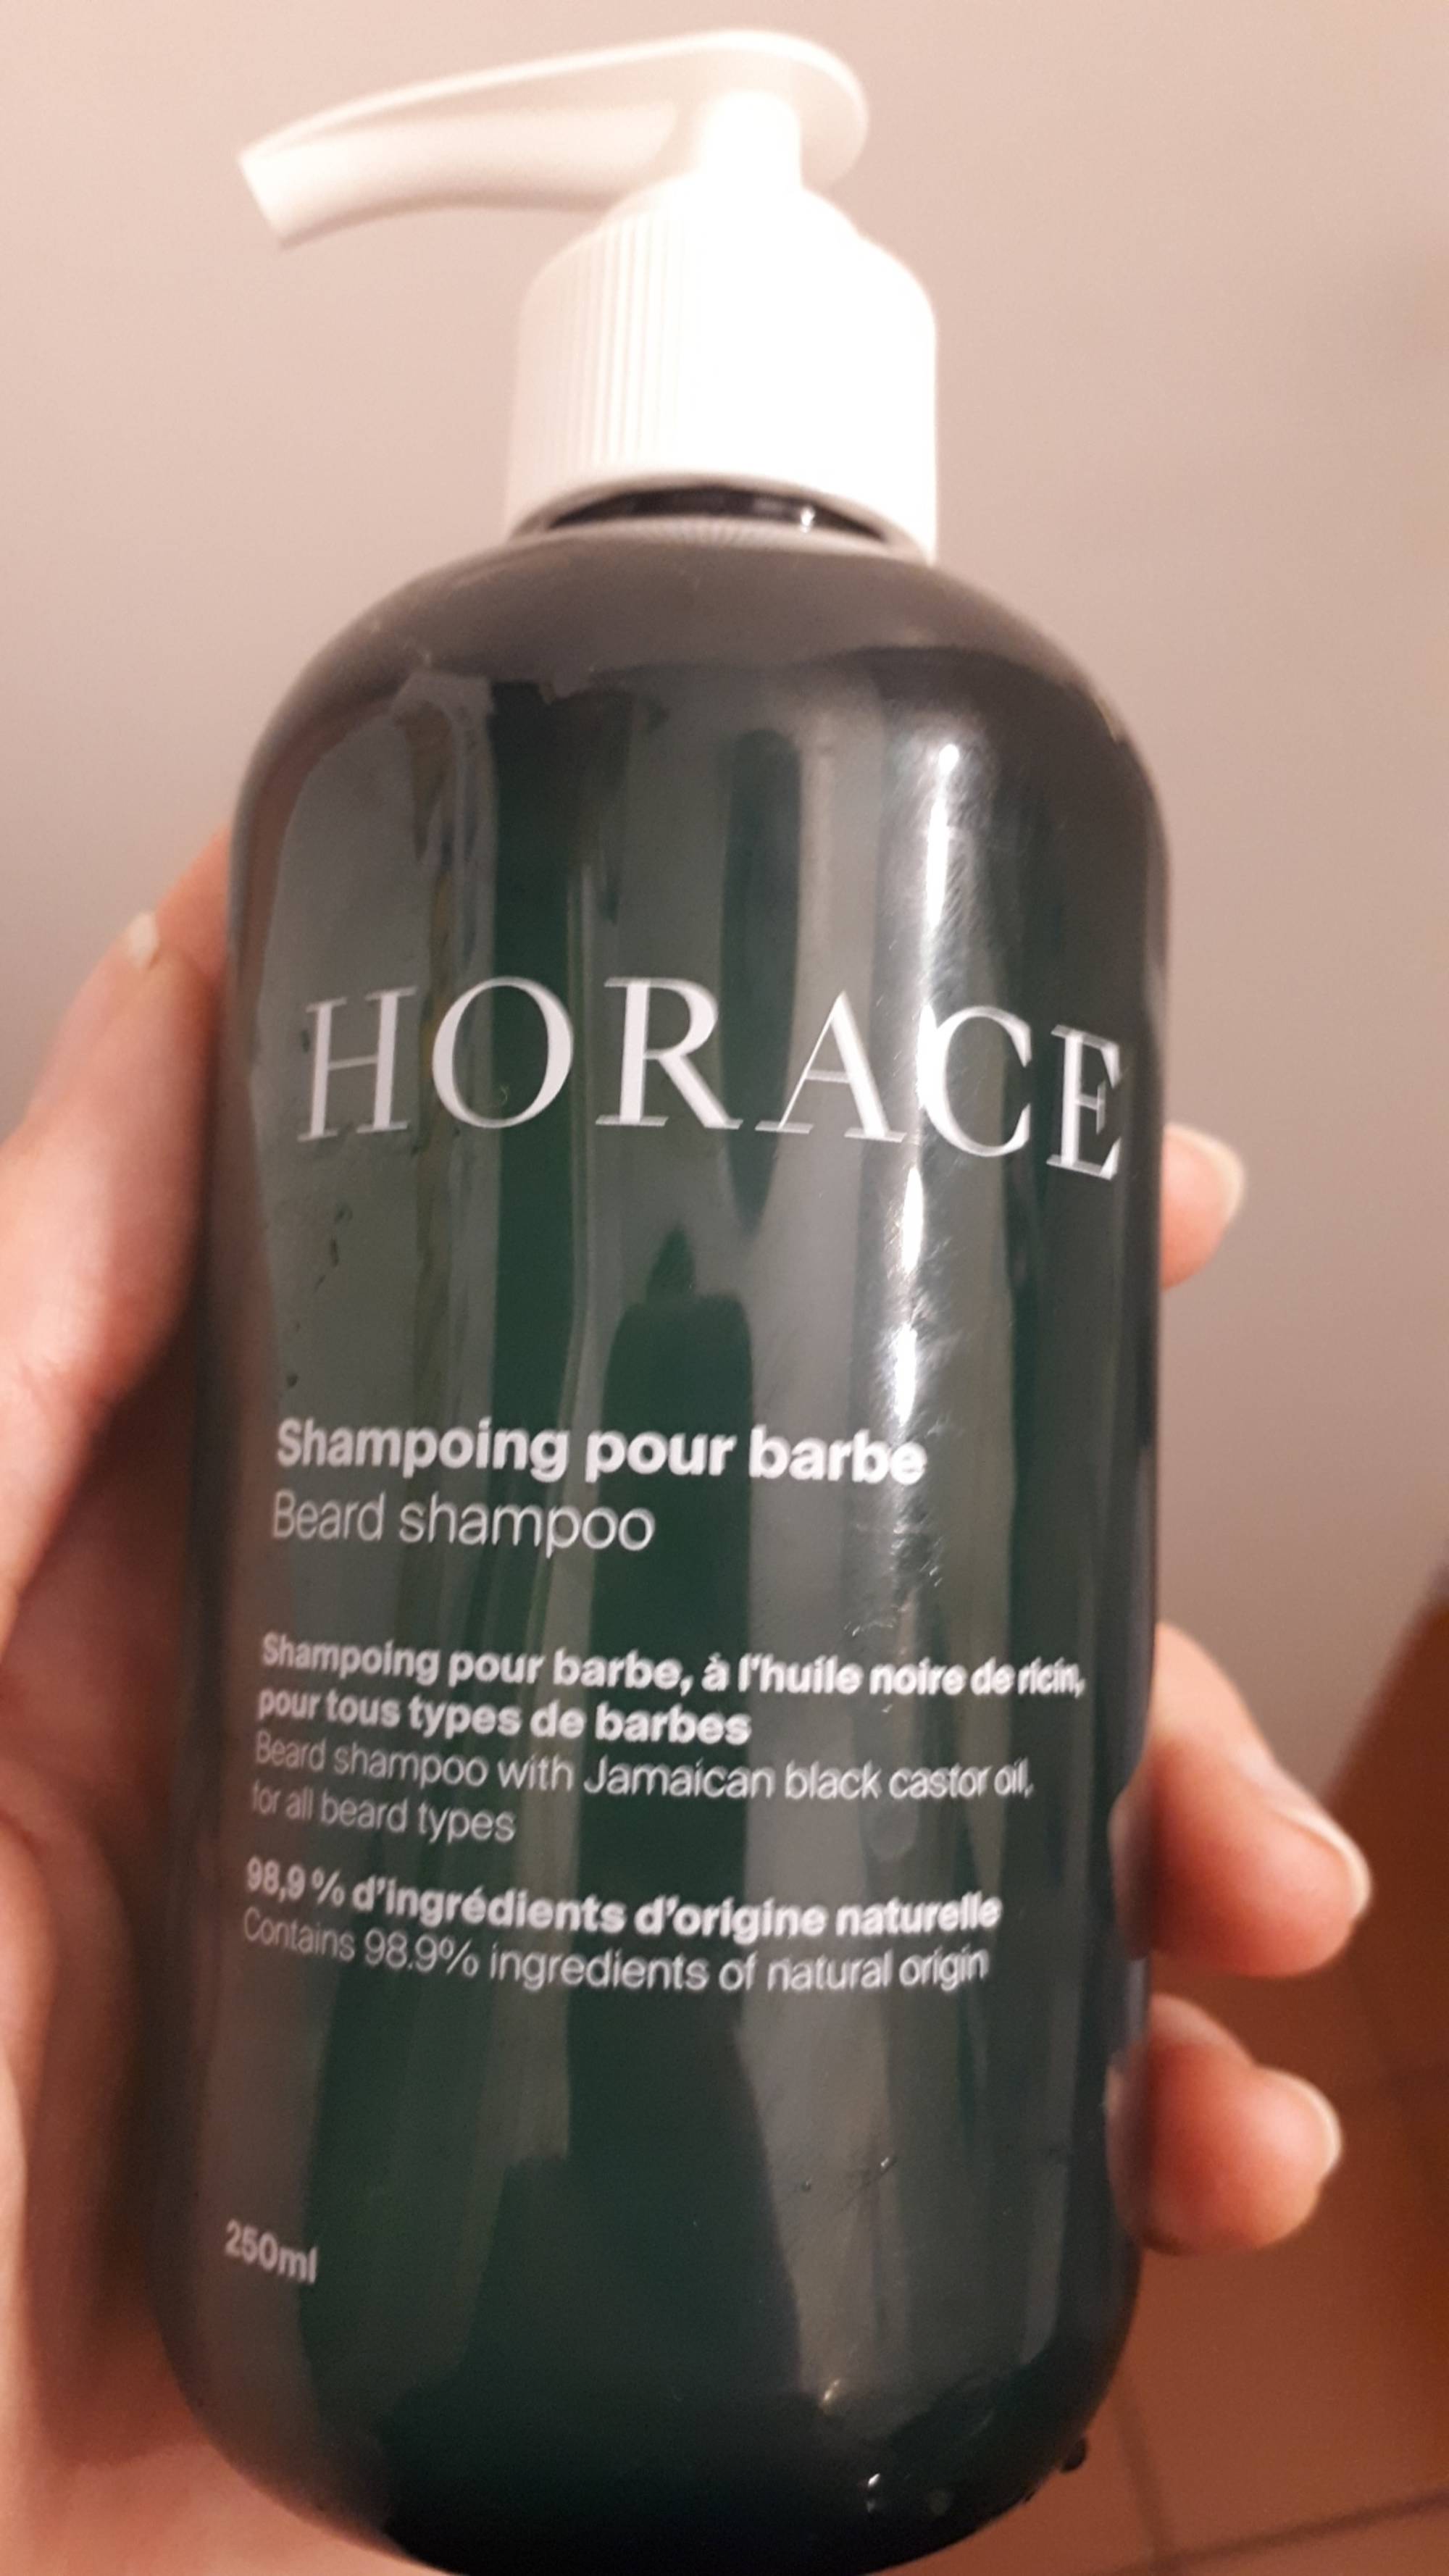 HORACE - Shampooing pour barbe